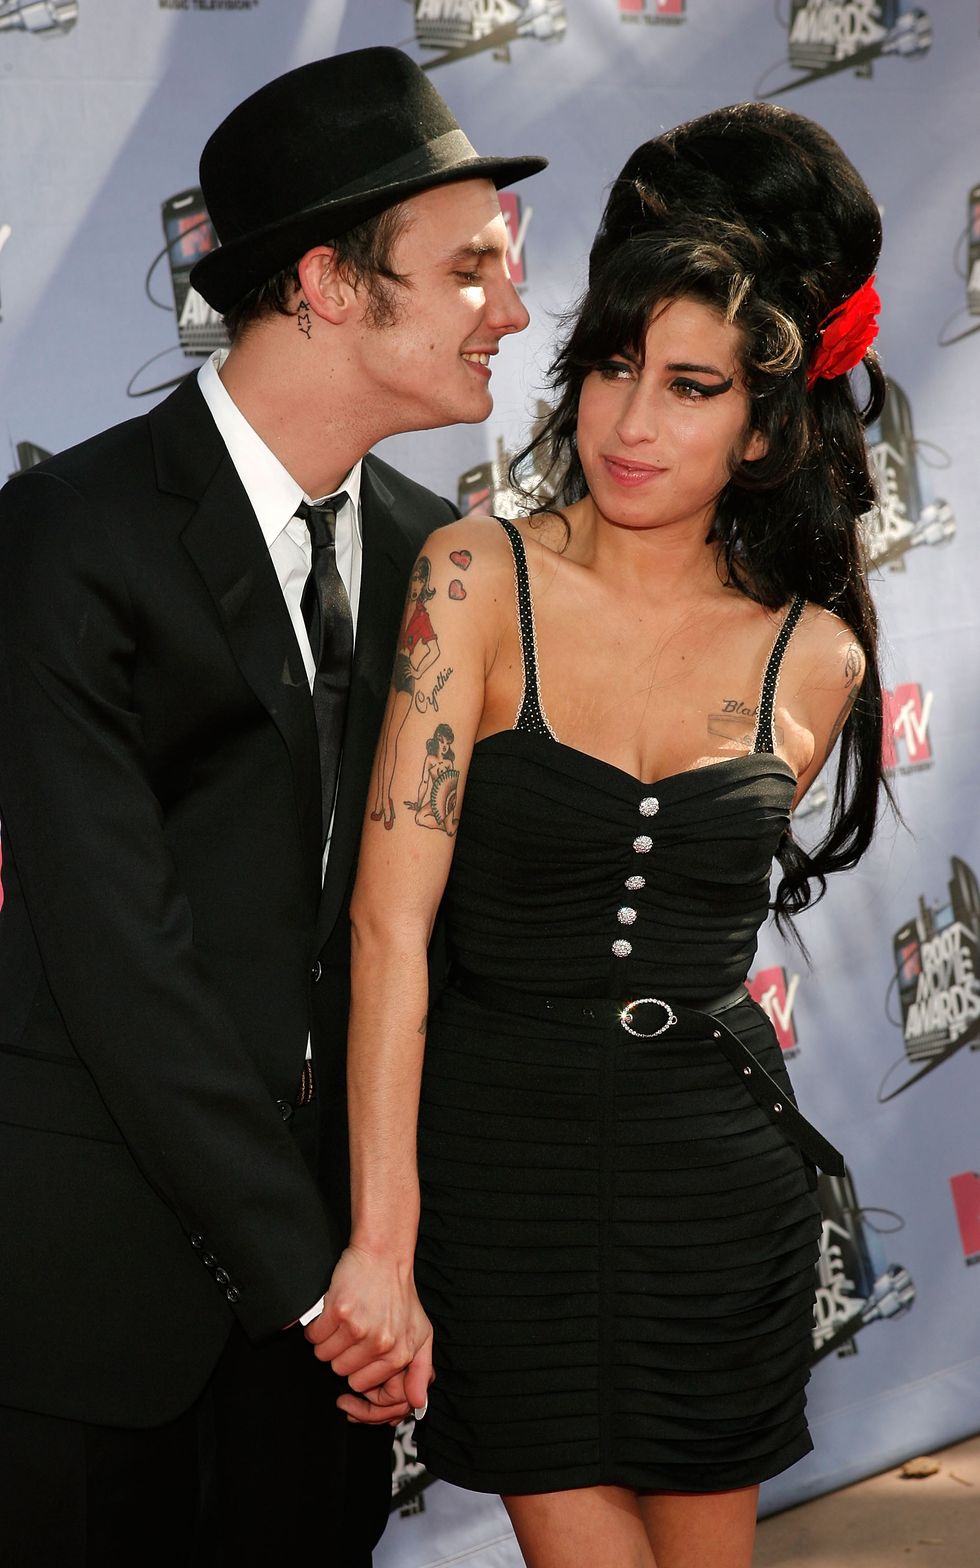 Amy Winehouse and Blake Fielder-Civil at the 2007 MTV Movie Awards held at the Gibson Amphitheatre on June 3, 2007, in Universal City, California